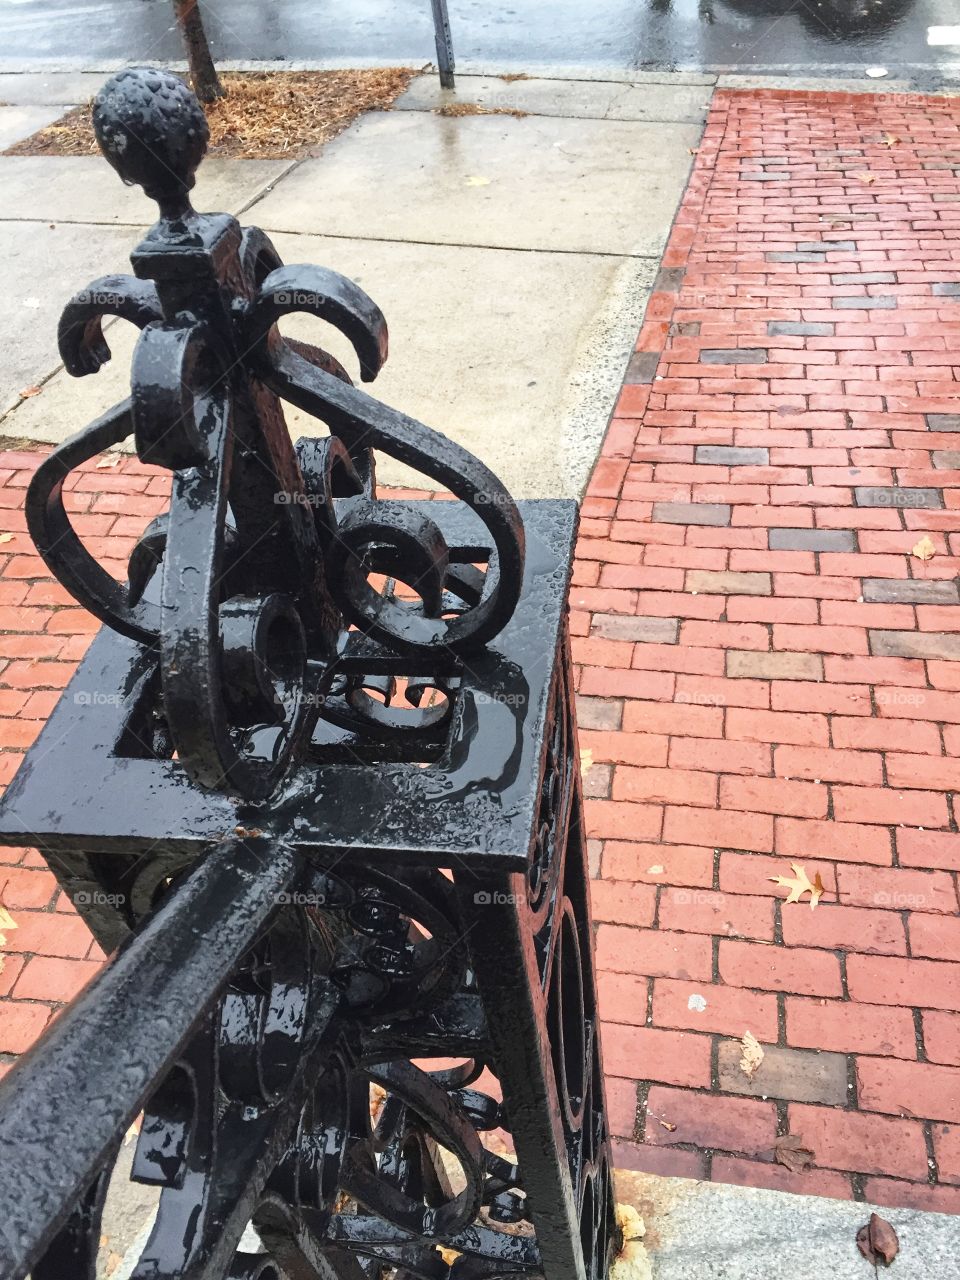 Decorative iron work tops the post of a stair railing next to a fence. The wrought iron peace is painted black. It is covered with water because it is raining out.